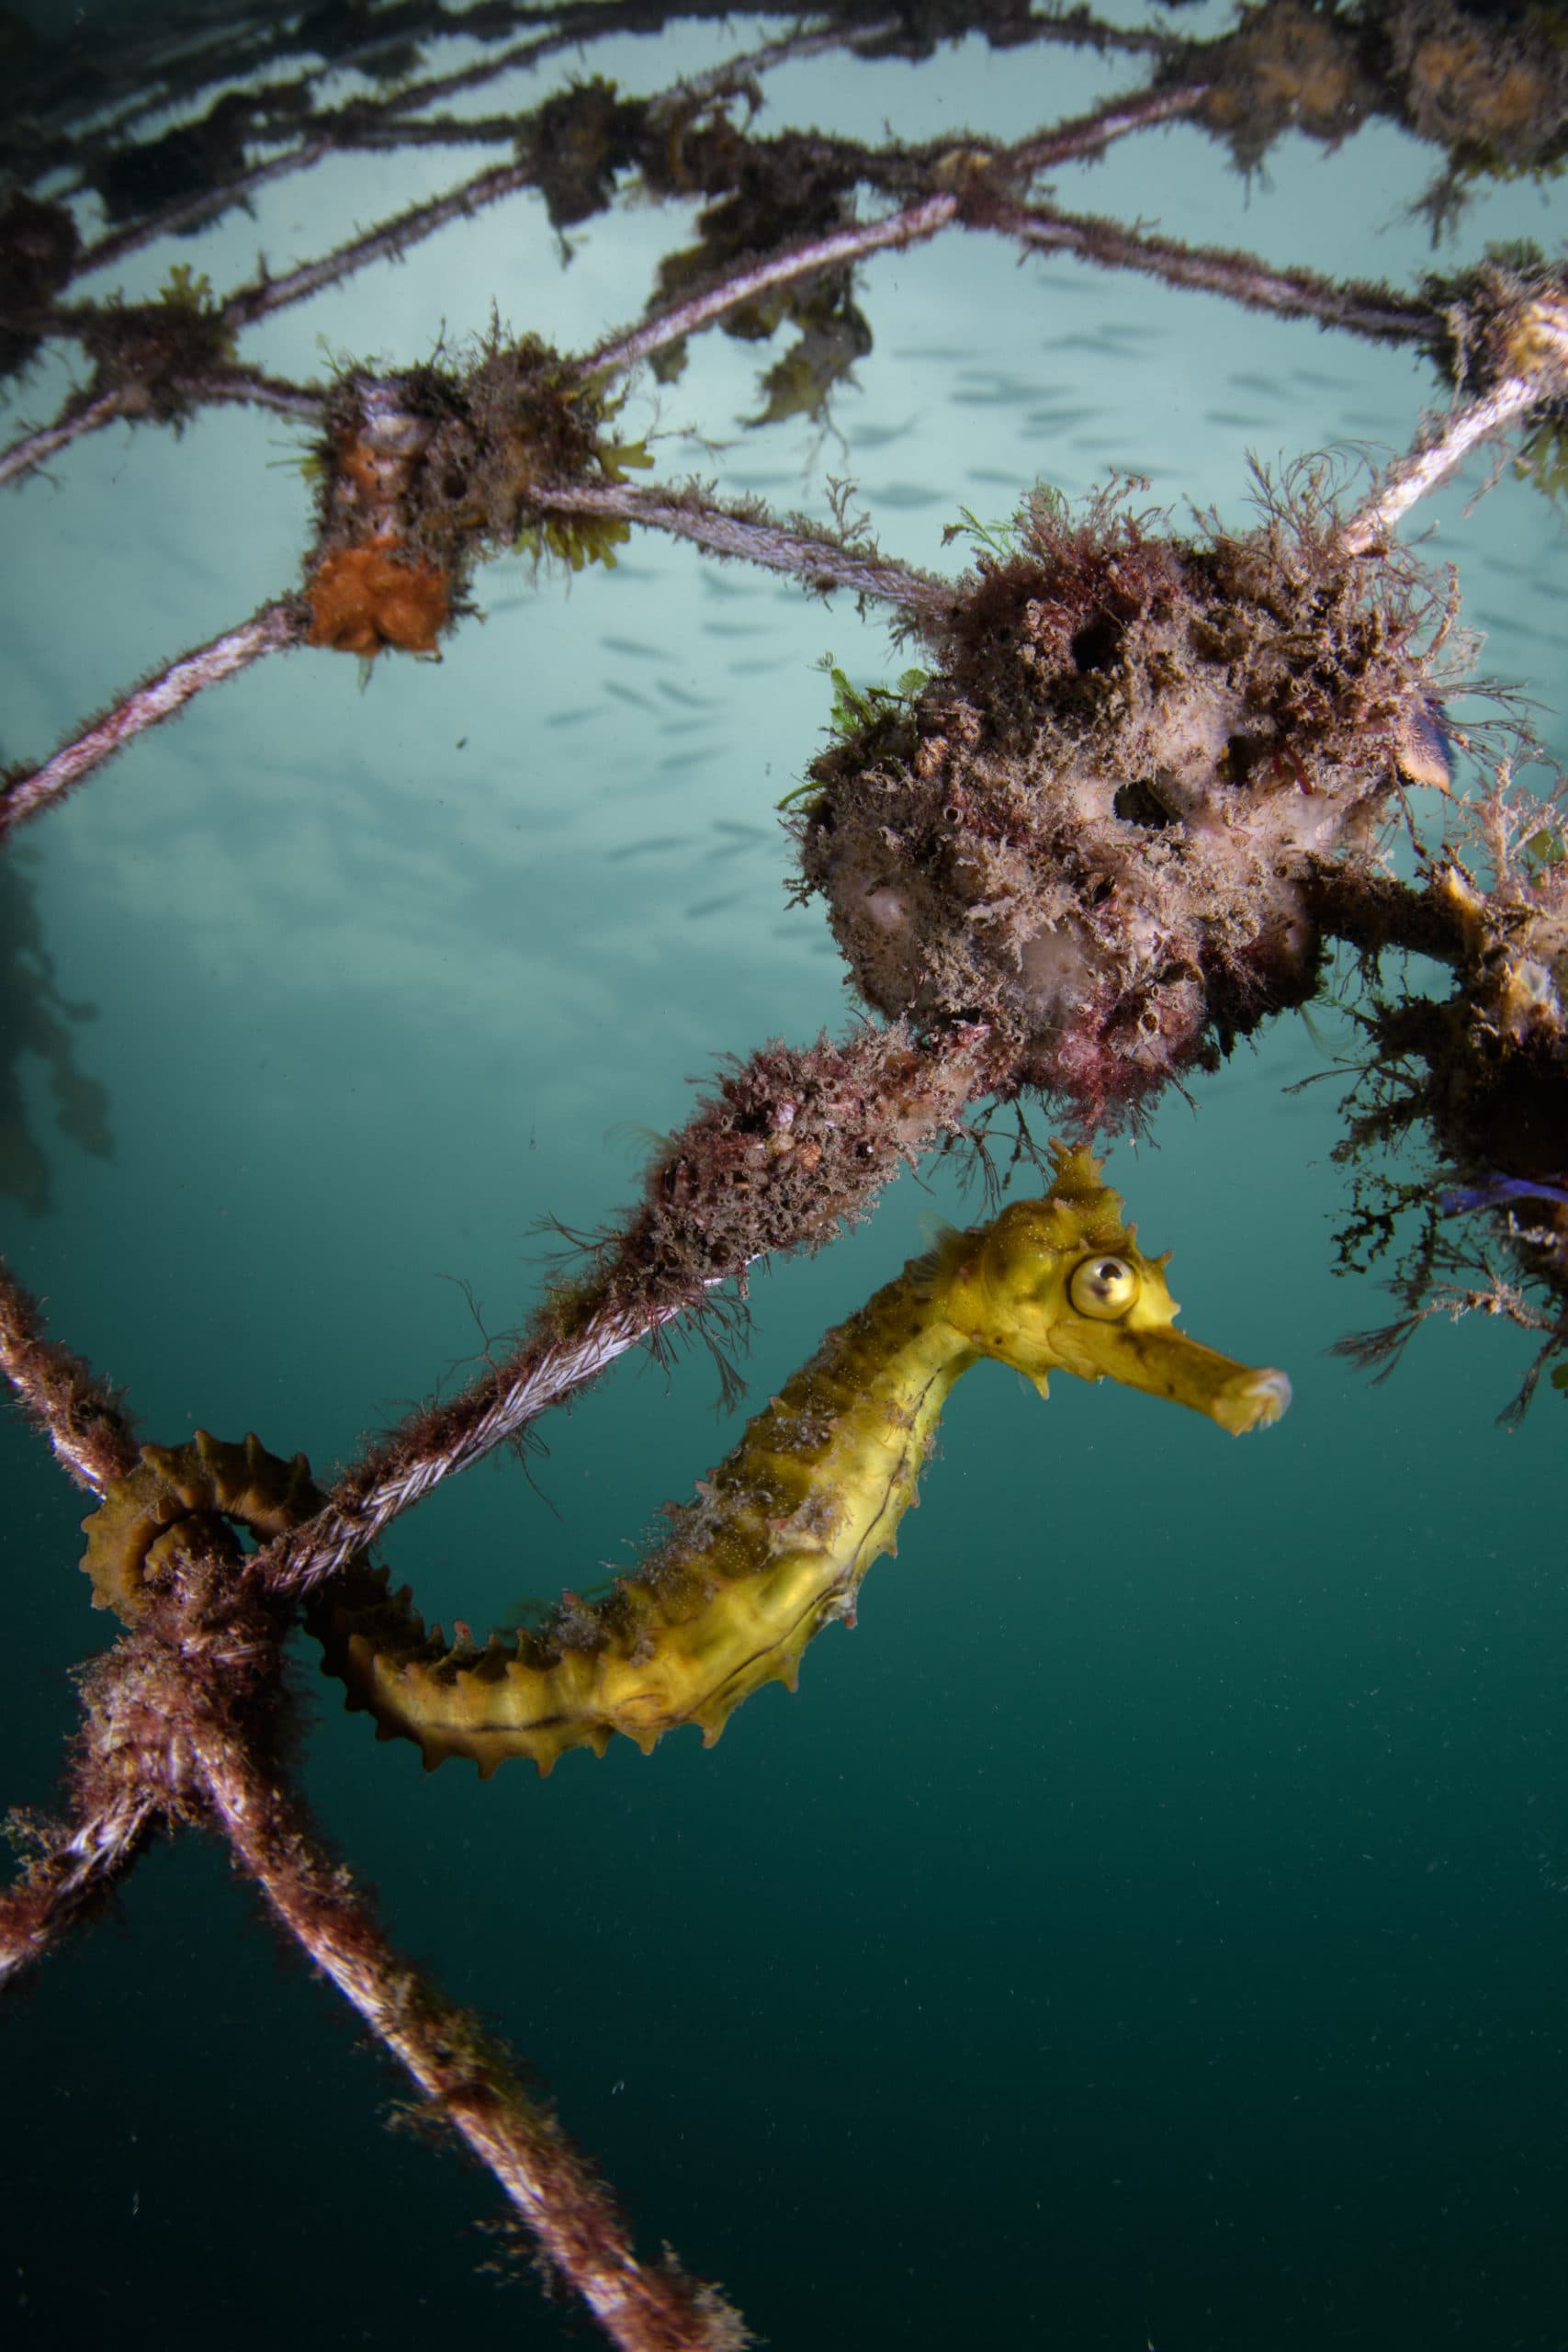 White’s seahorses on the anti-shark nets are often photographed with a macro lens. Here, the CFWA technique conveys a richer understanding of that seahorse’s habitat.